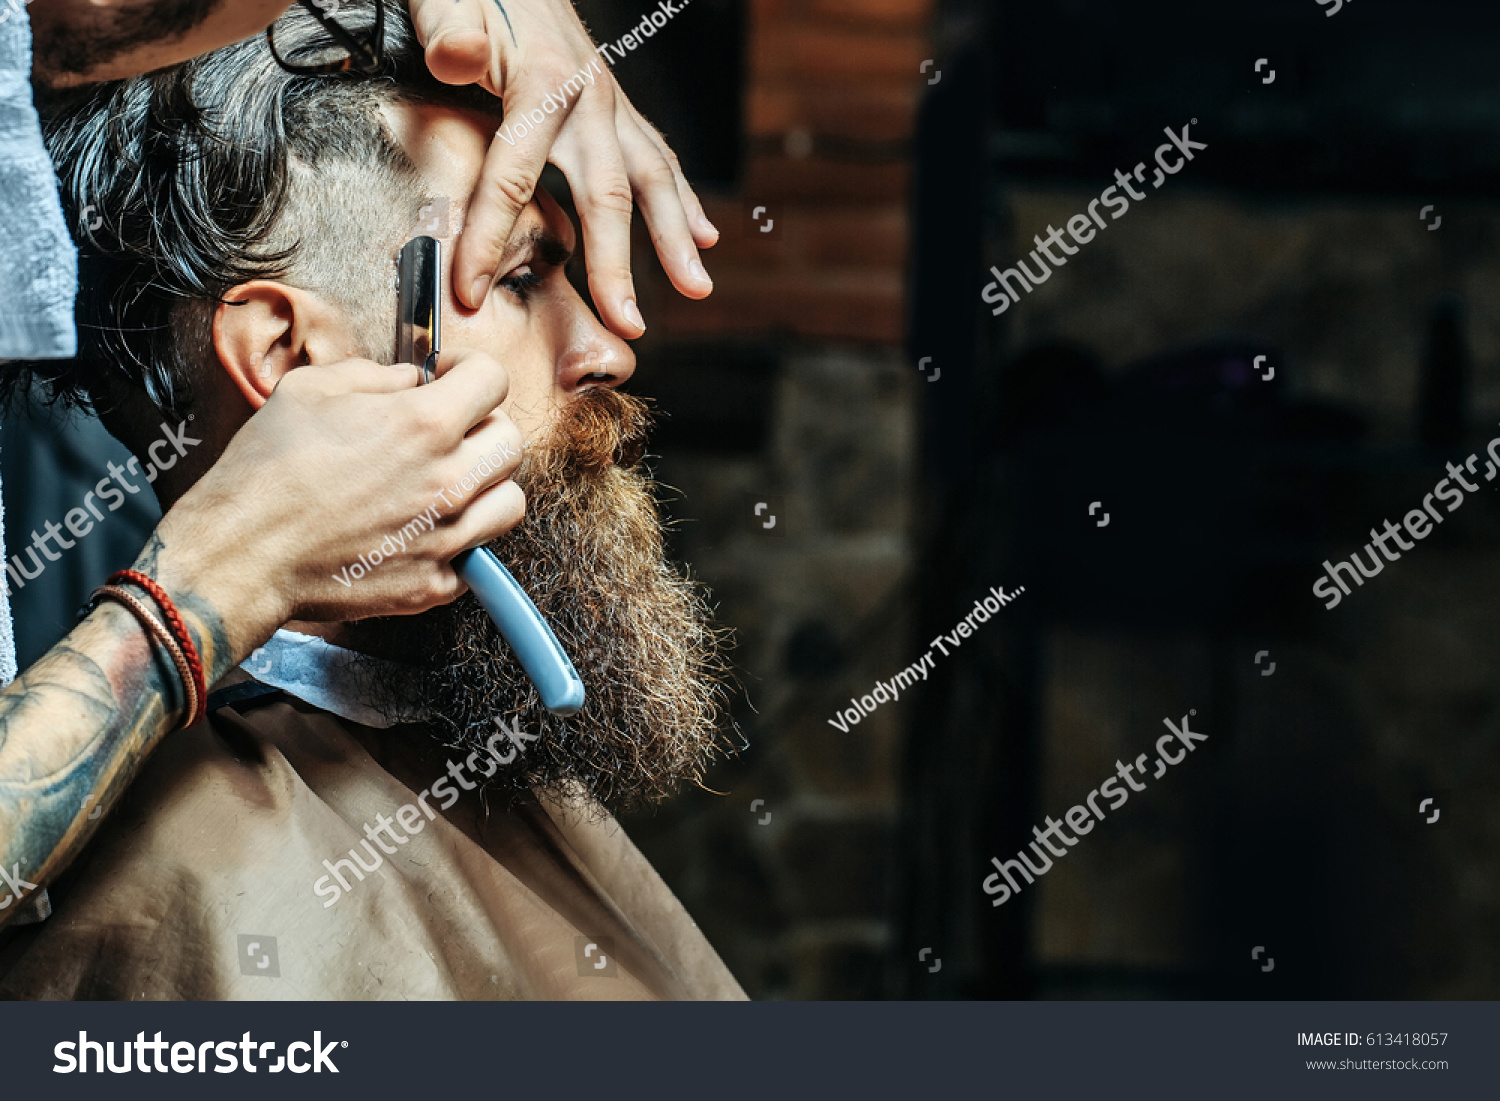 Bearded man with long beard, brutal, caucasian hipster with moustache, getting stylish hair shaving, haircut, with razor by barber or hairdresser with tattoo on hands at barbershop #613418057